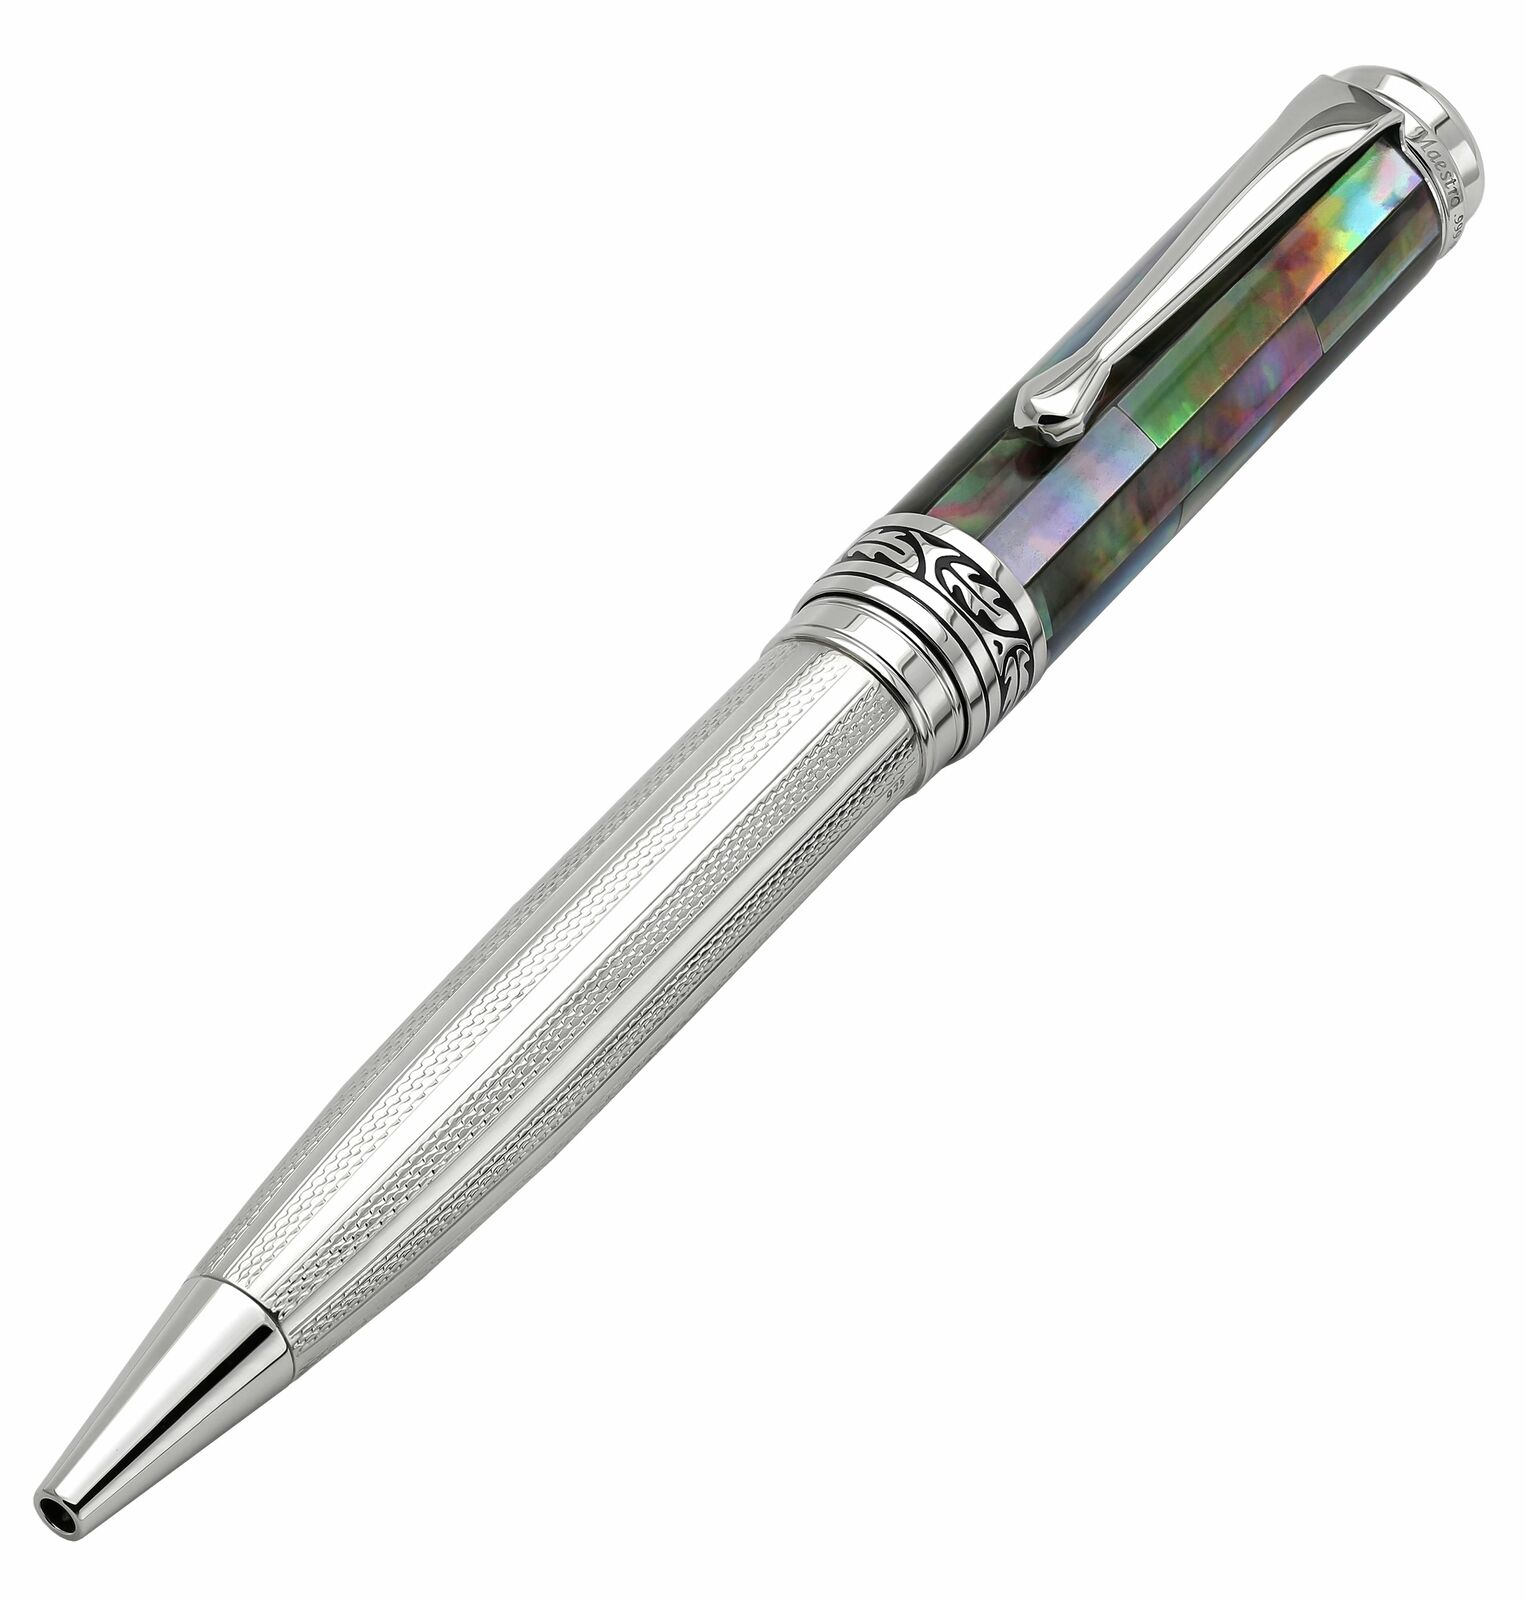 Xezo Handcrafted Maestro 925 Black Mother of Pearl and Silver Ballpoint Pen.